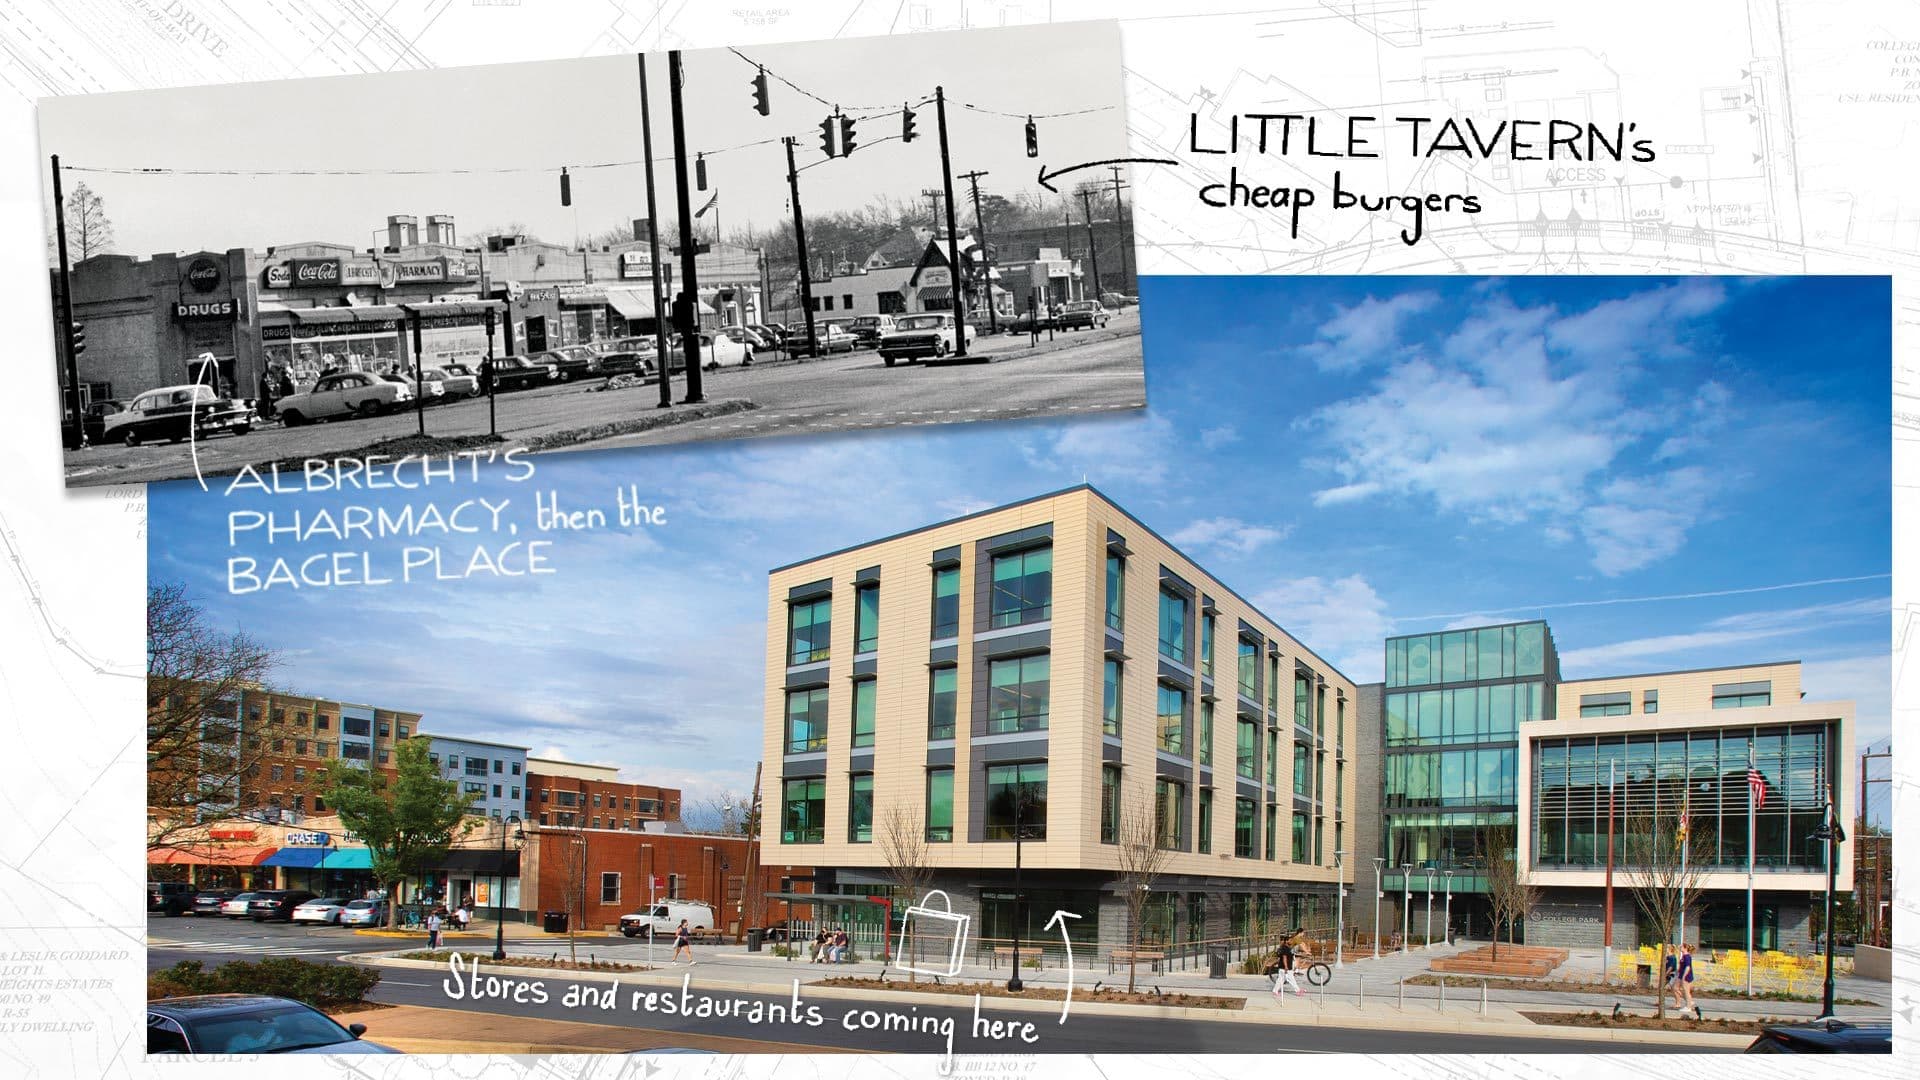 Collage showing archival photo of Albrecht's Pharmacy, then the Bagel Place, and Little Tavern's cheap burgers, plus the new city hall: Stores and restaurants coming here